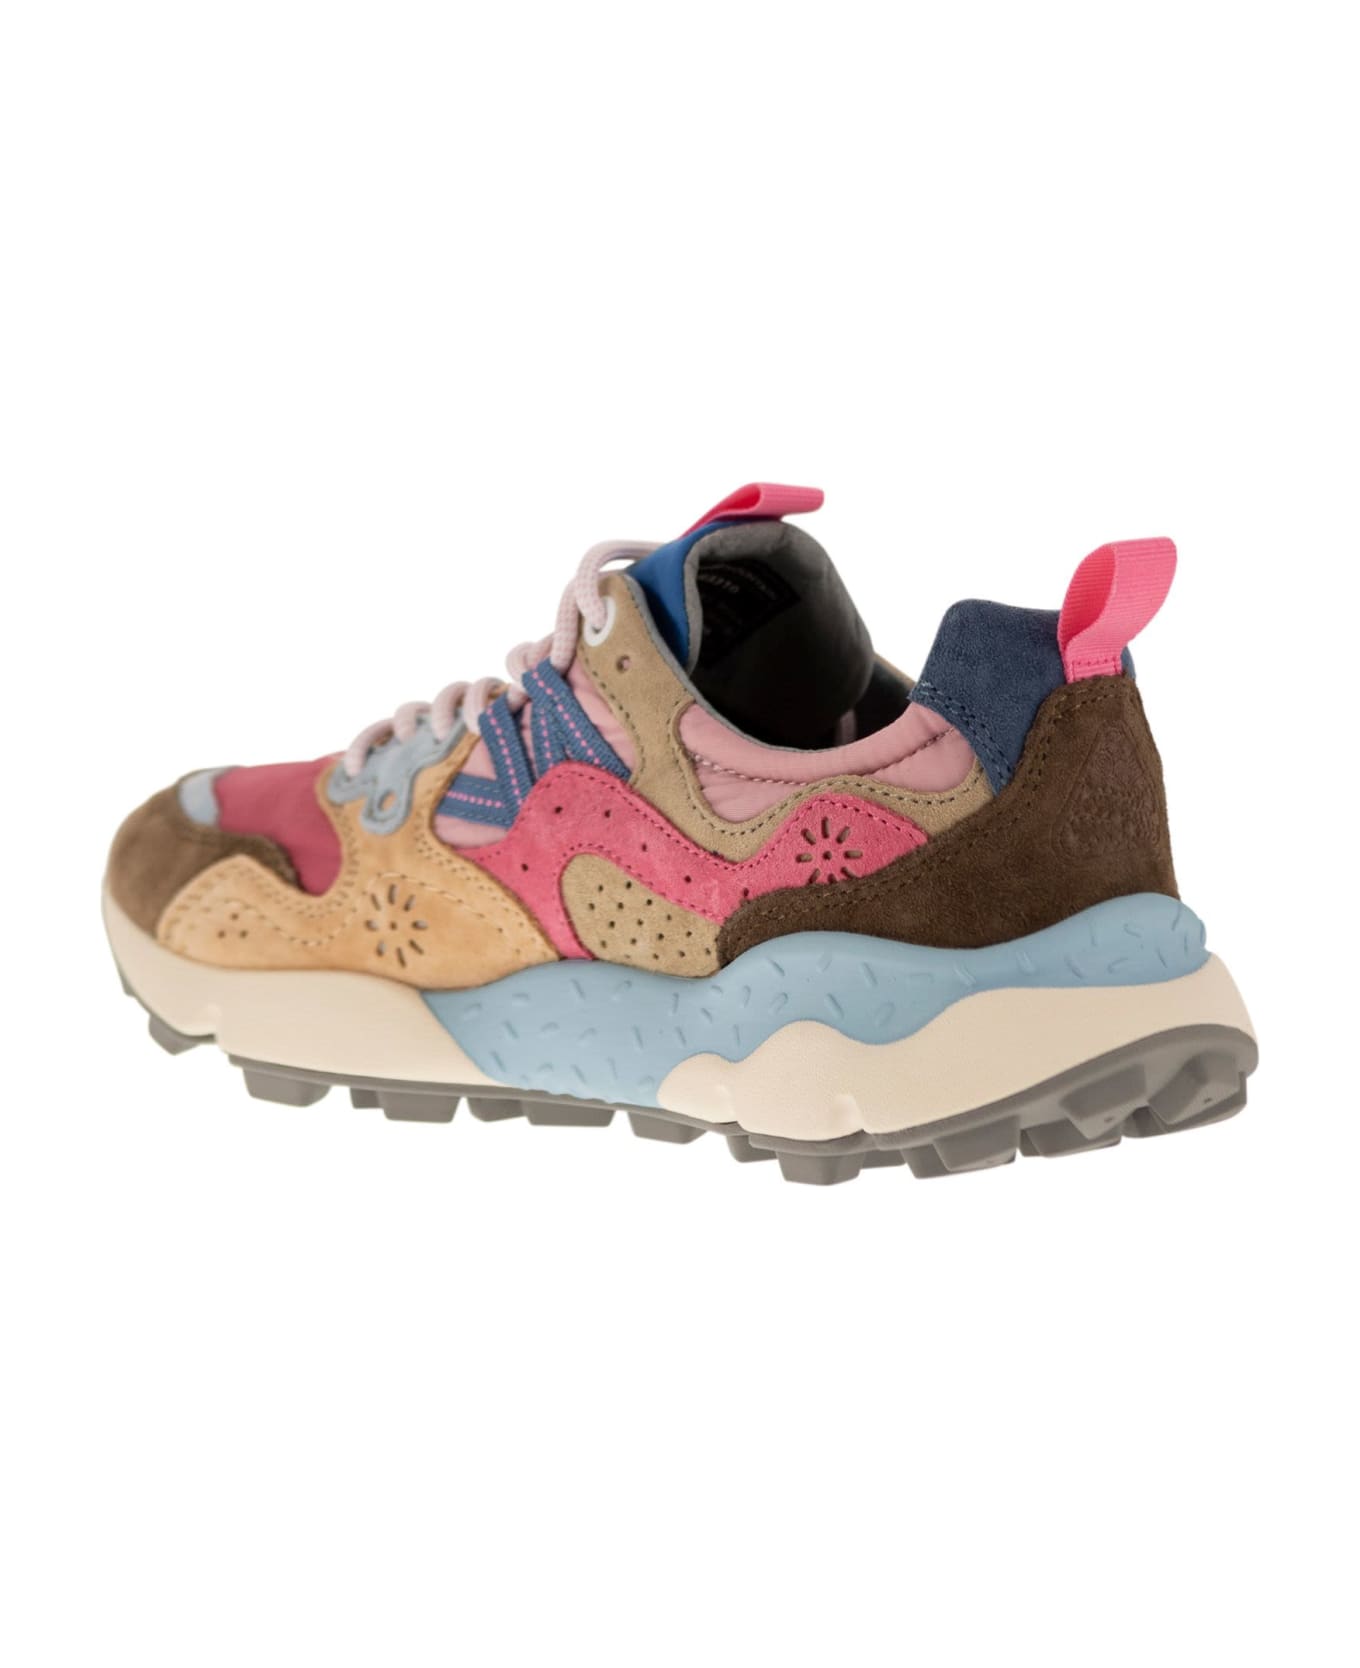 Flower Mountain Yamano 3 - Sneakers In Suede And Technical Fabric - Pink